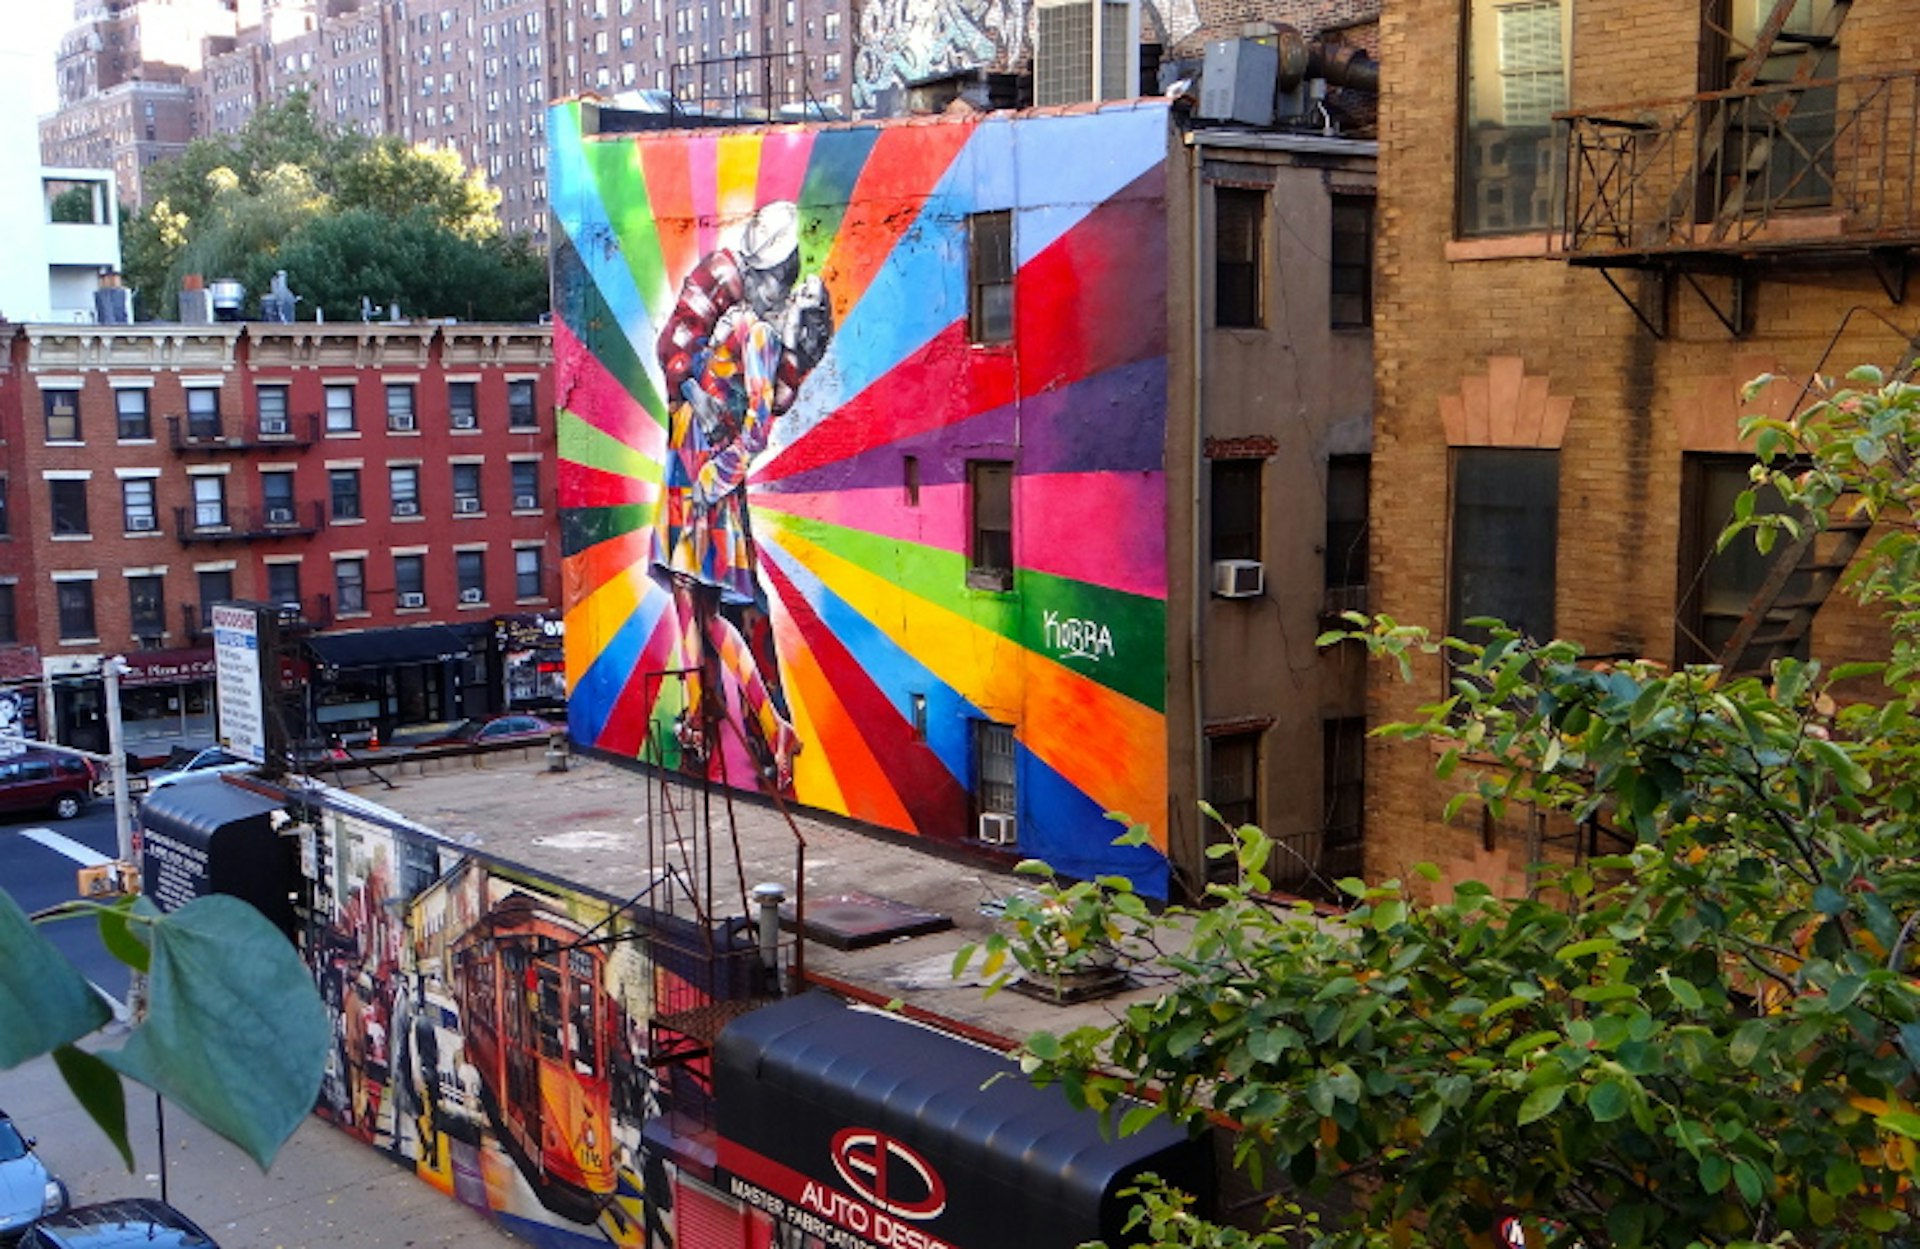 Eduardo Kobra's couple kissing mural is on 25th St at Tenth Ave. Image by Megan Eileen McDonough / Lonely Planet 